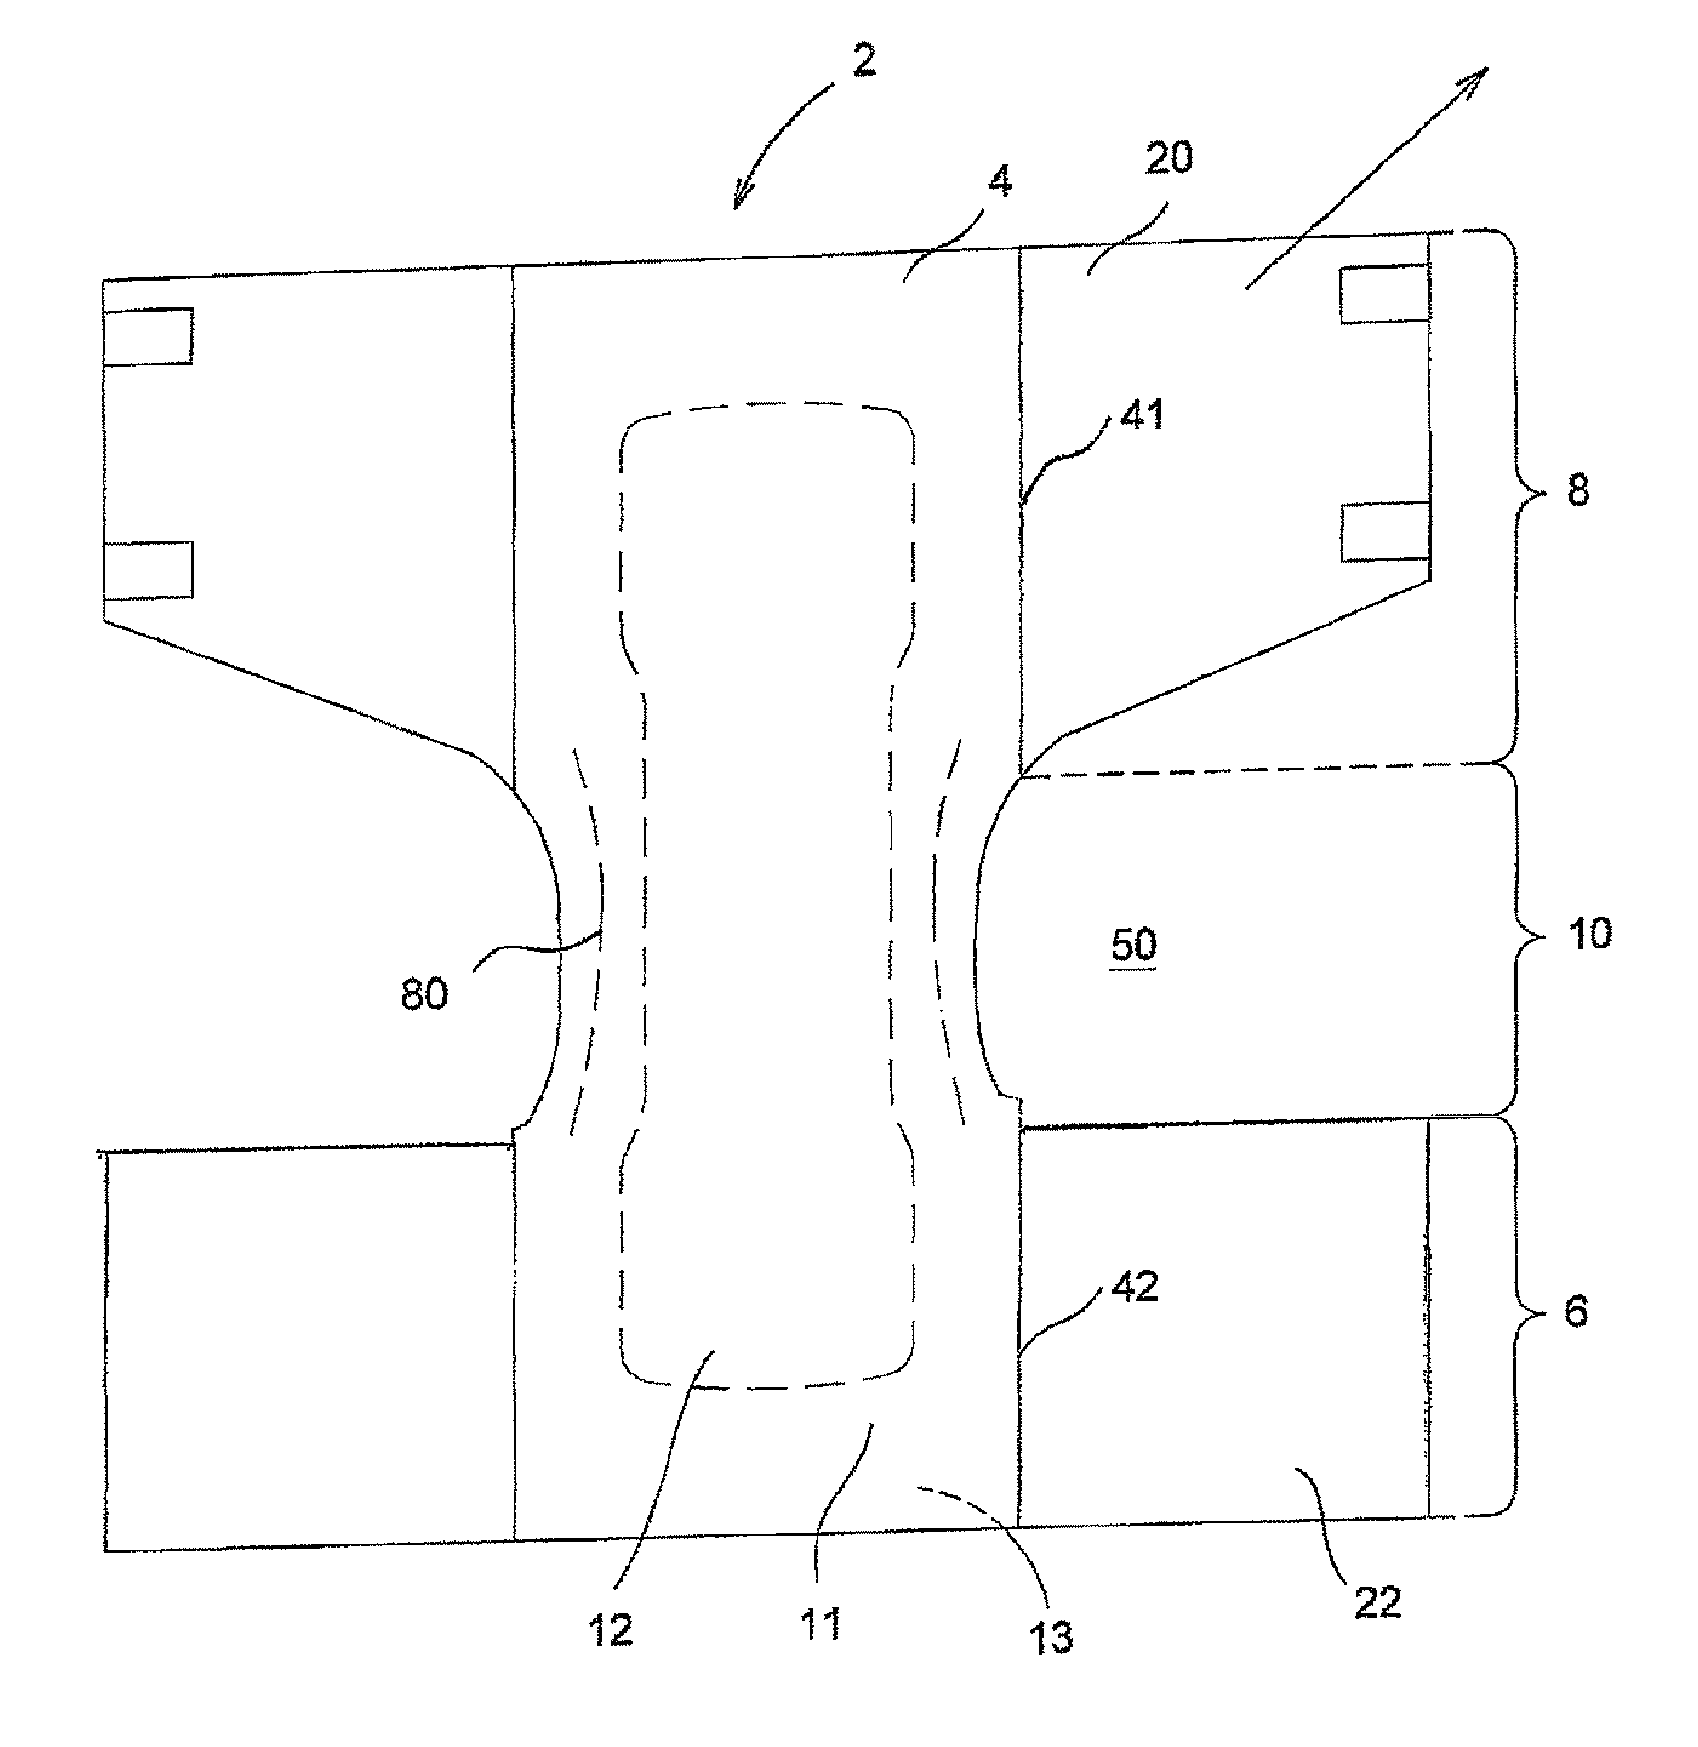 Absorbent disposable incontinence pants comprising side sections